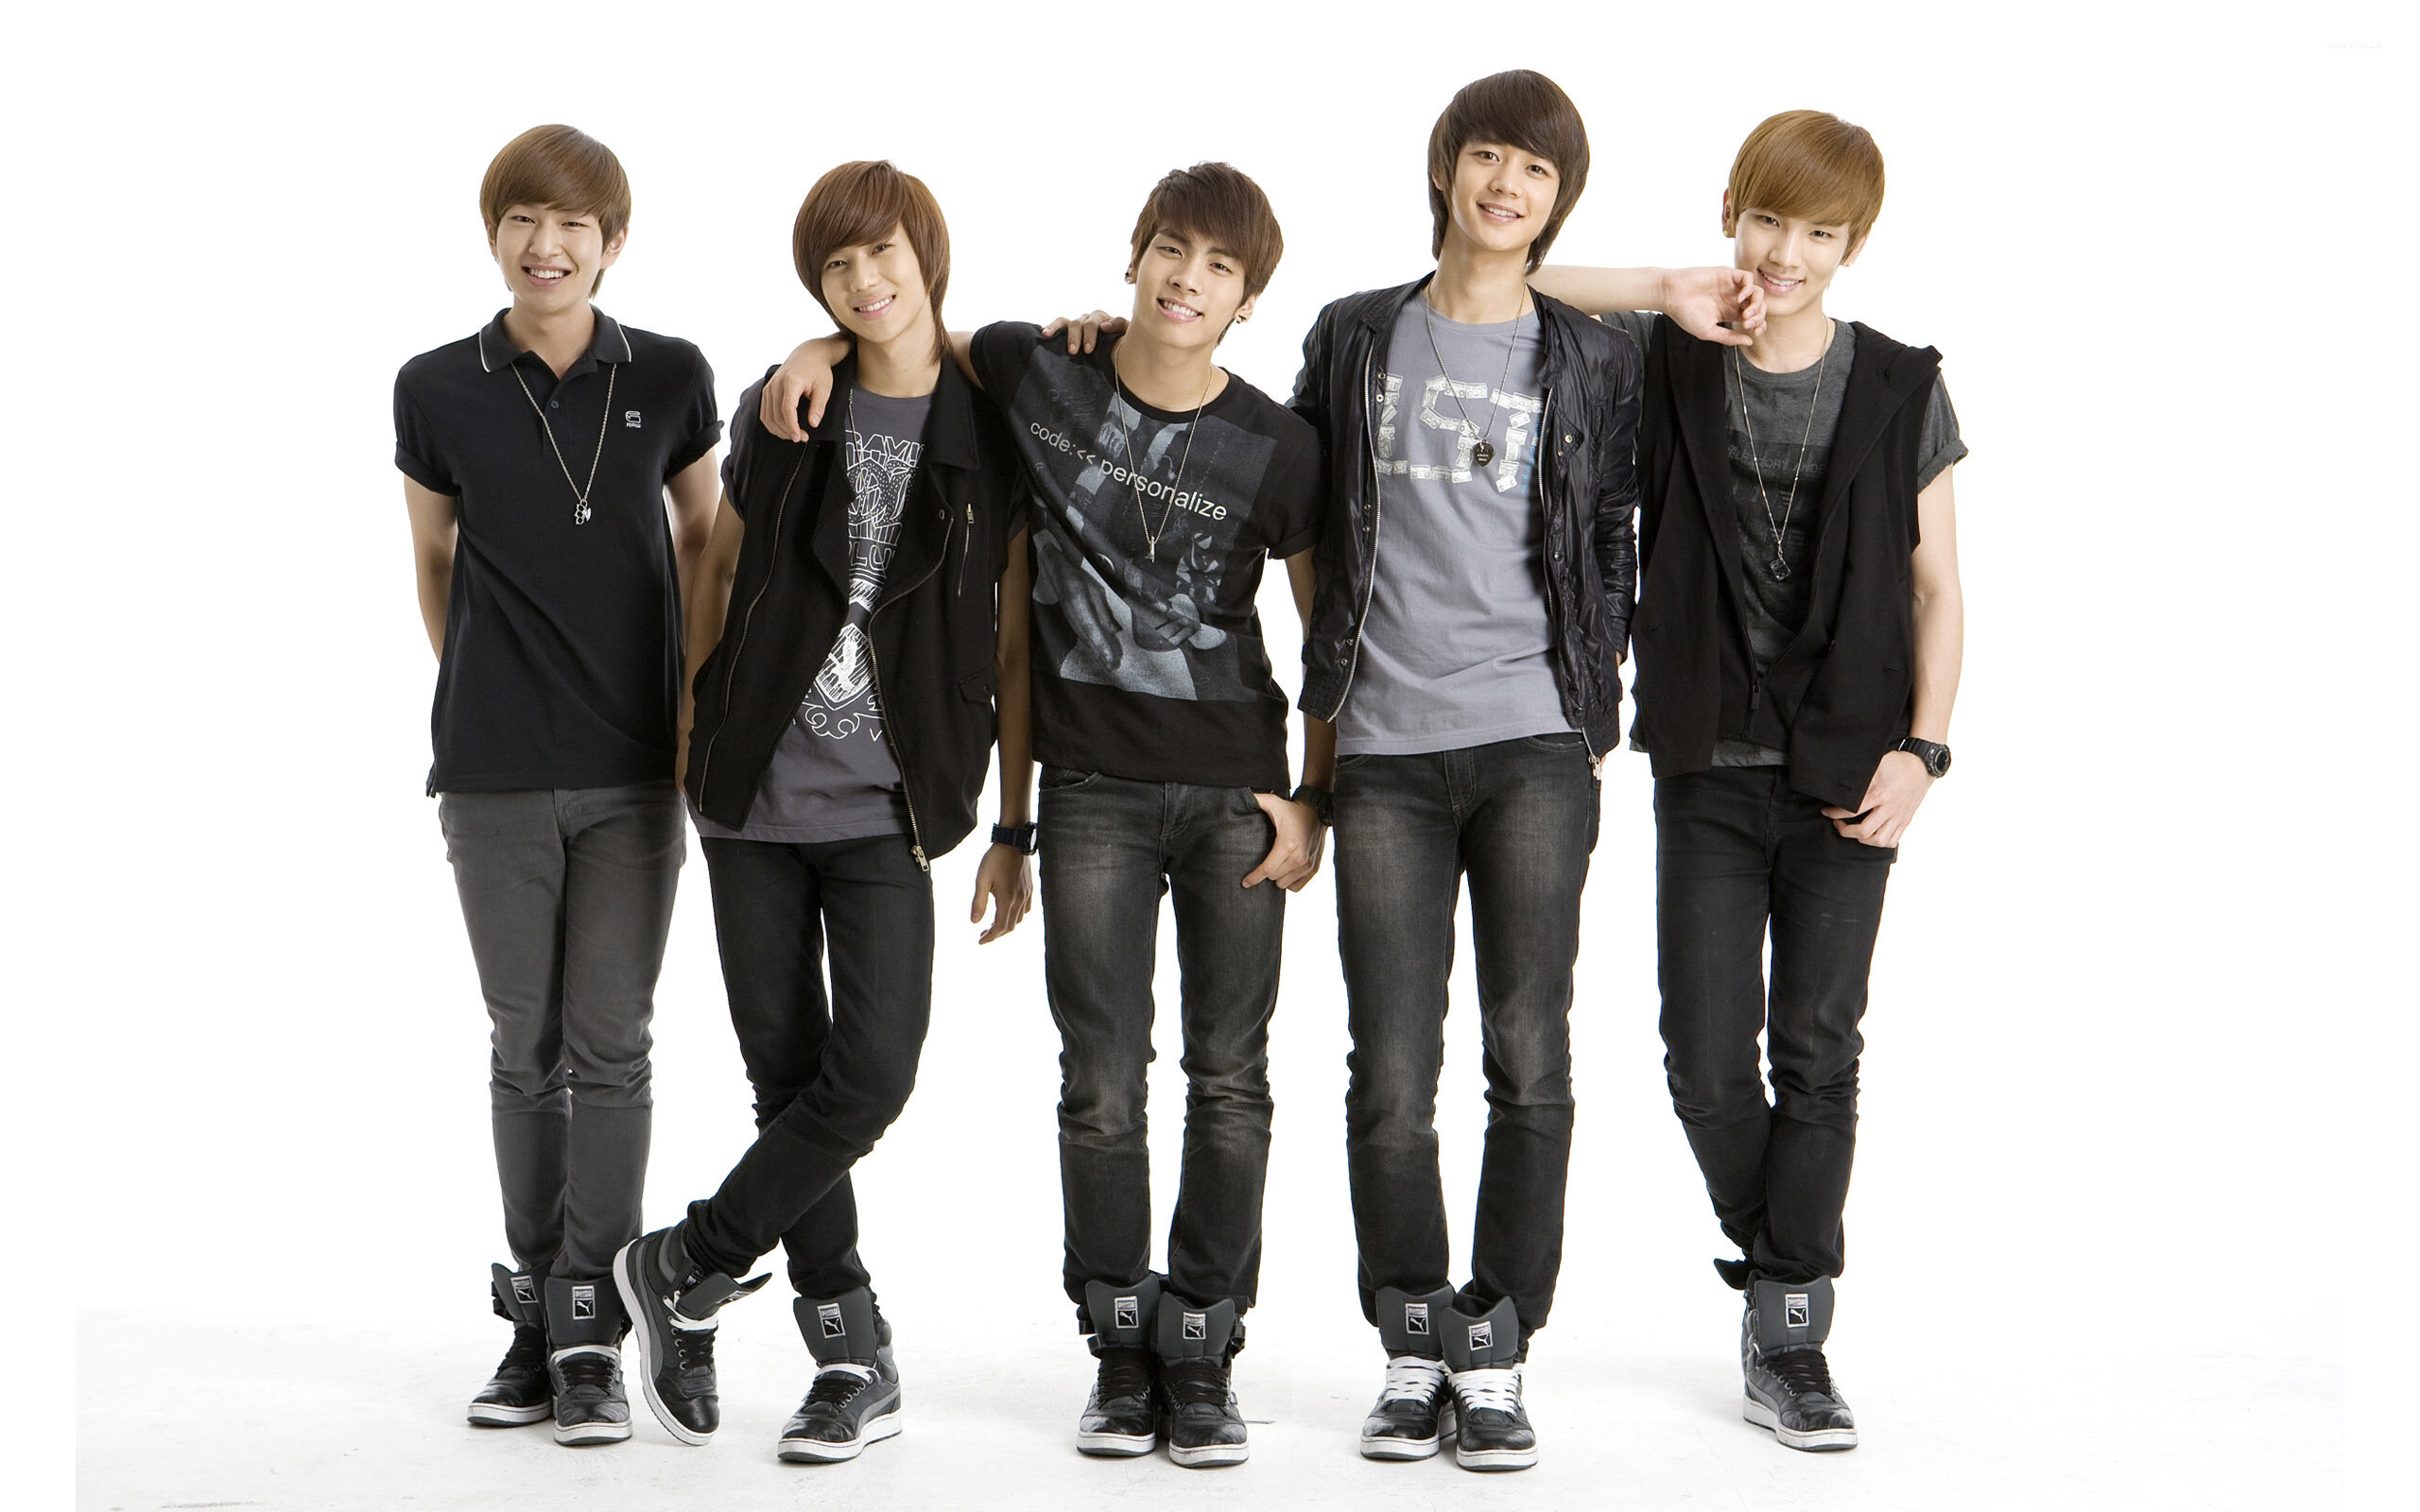 SHINee: The group released their first Korean studio album, The Shinee World, in August 2008. 2560x1600 HD Background.